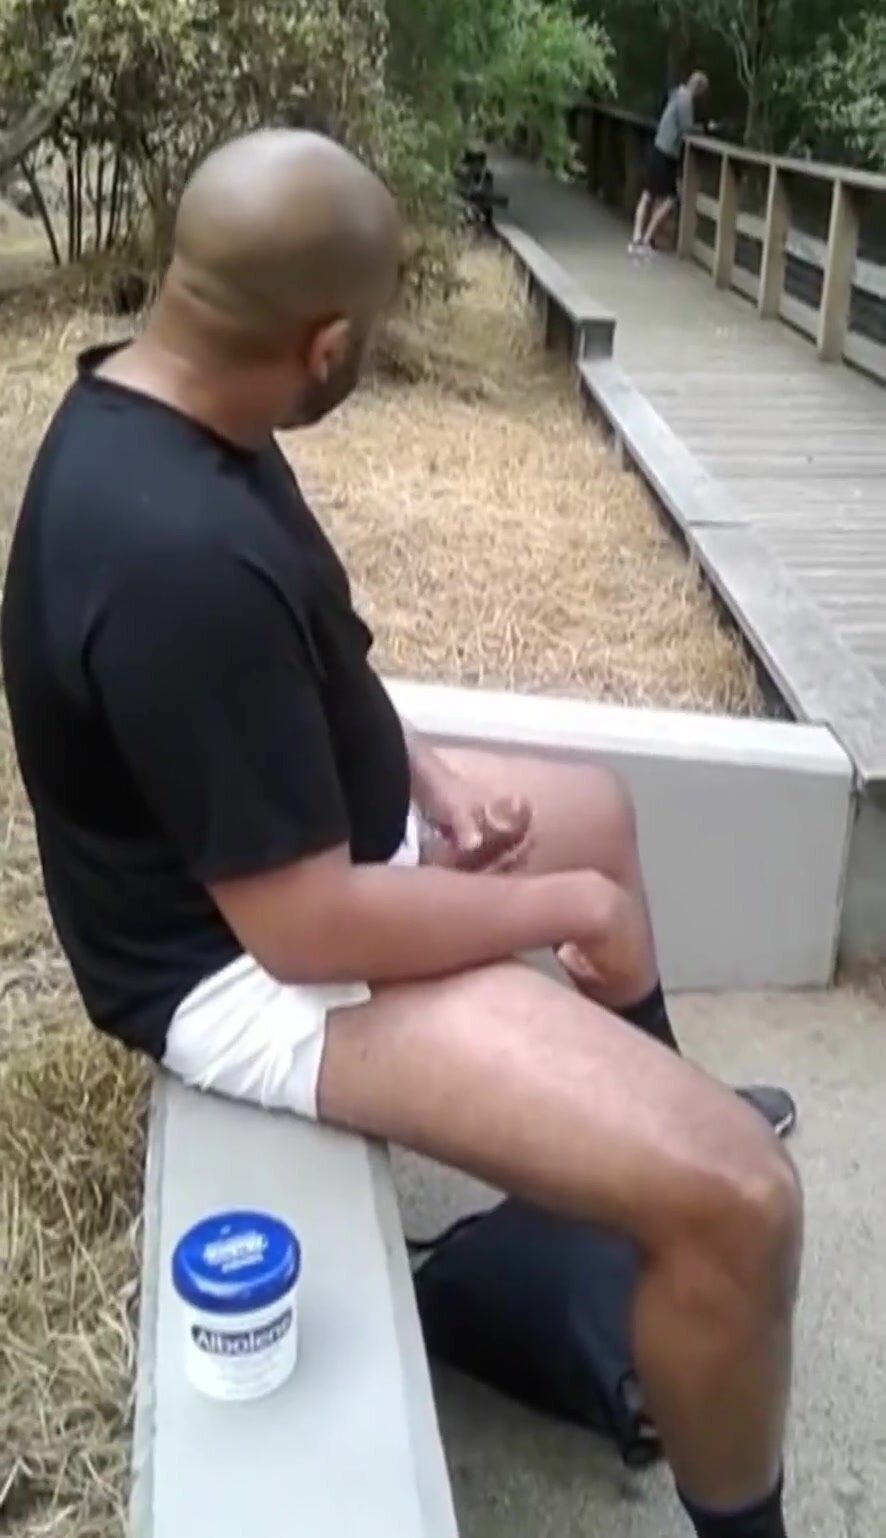 Ape looking to be tamed